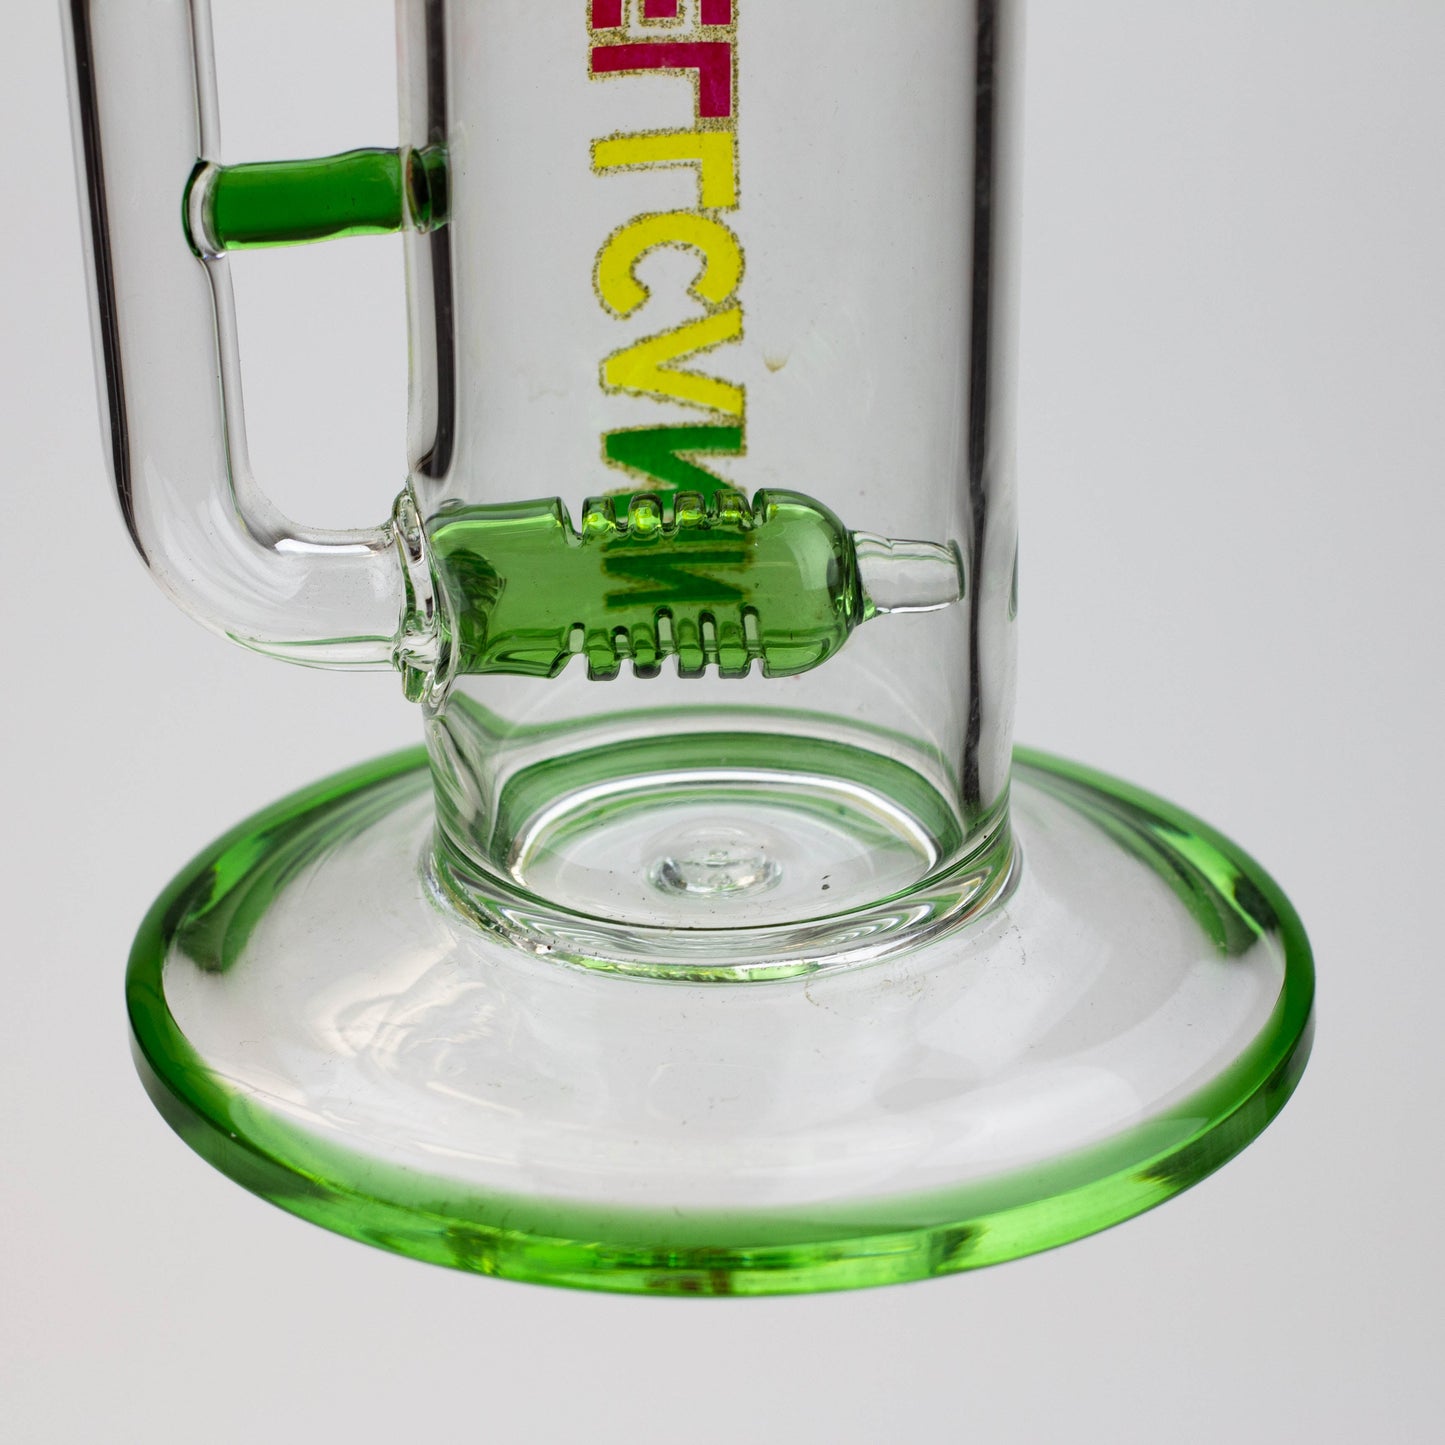 9" WellCann Inline diffuser Rig with Banger_6